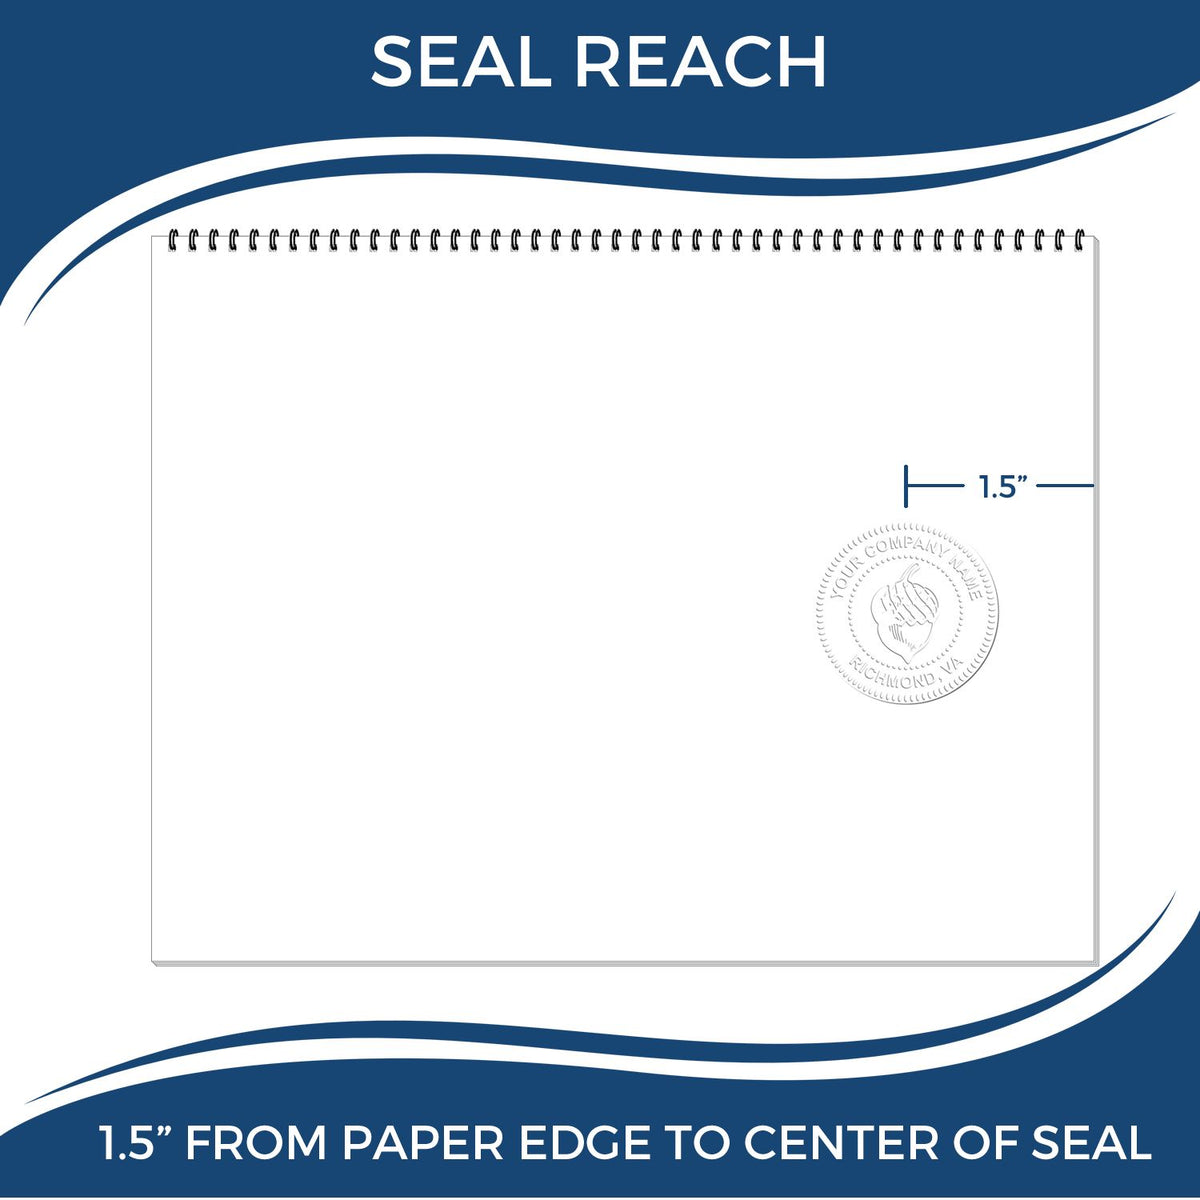 An infographic showing the seal reach which is represented by a ruler and a miniature seal image of the State of South Dakota Soft Land Surveyor Embossing Seal